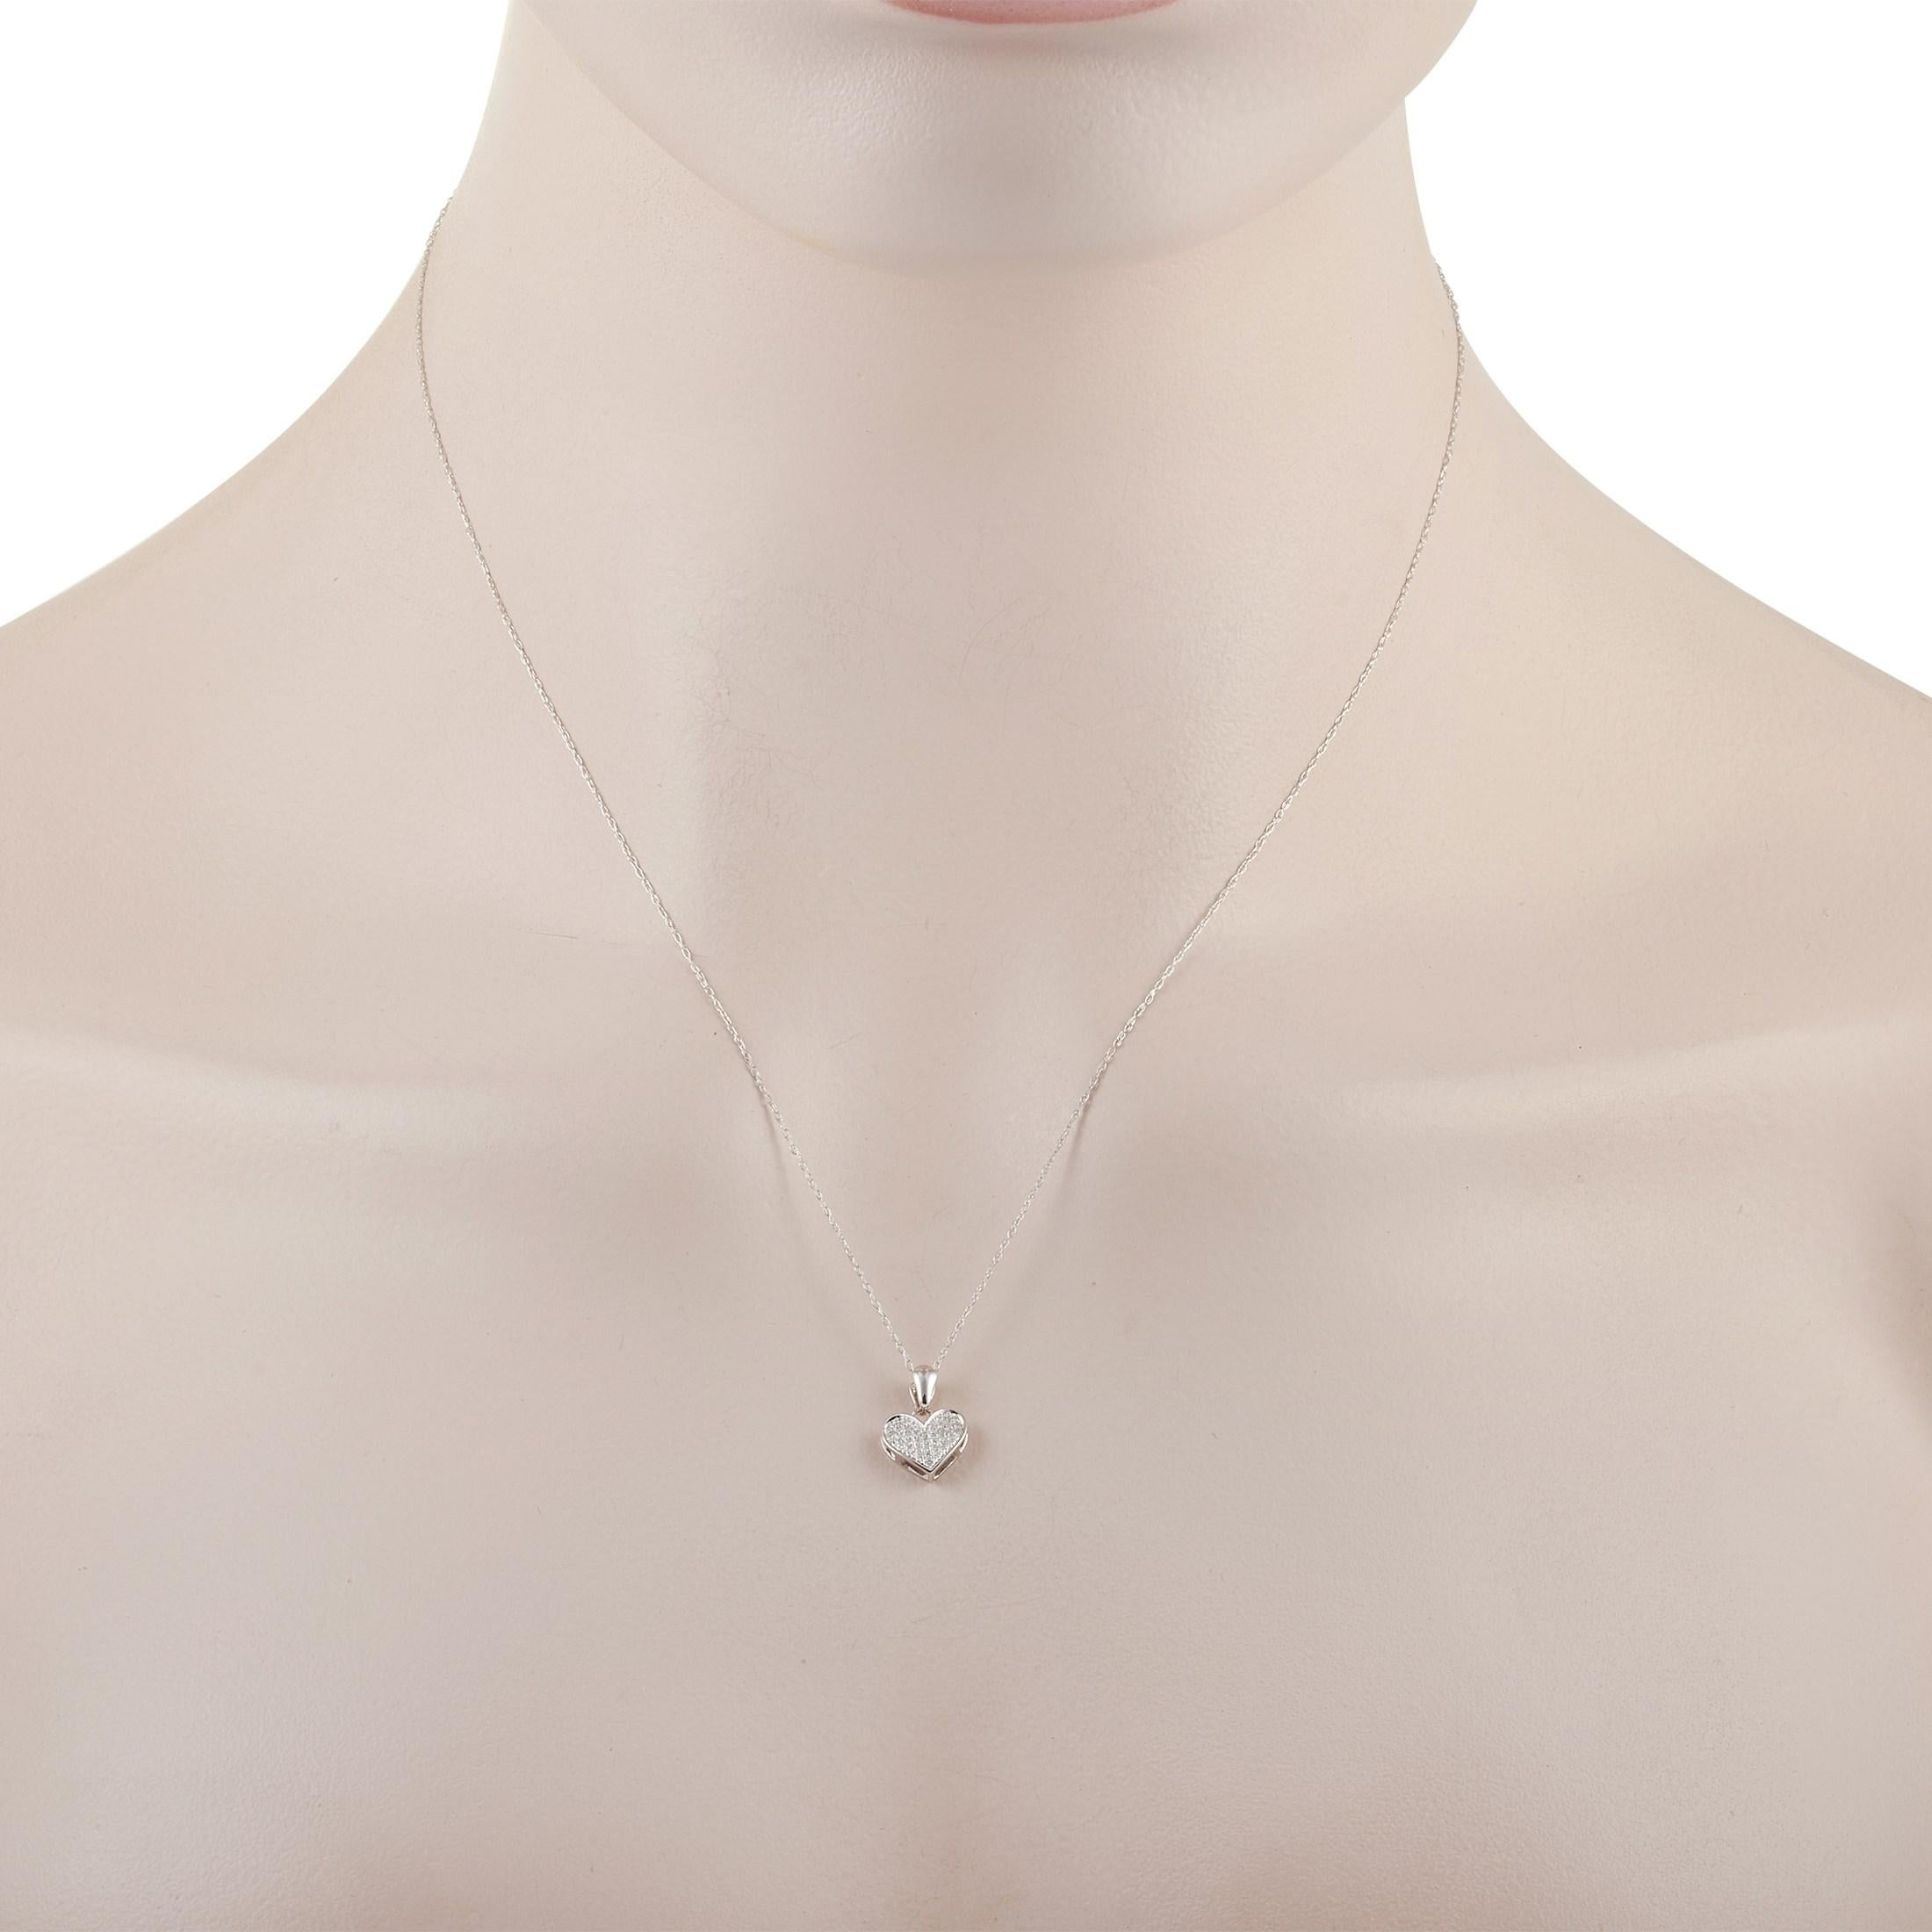 This LB Exclusive 14K White Gold 0.08 ct Diamond Heart Pendant Necklace features a delicate 14K White Gold chain that is 18 inches in length and includes a matching 14K White gold heart pendant set with 0.08 carats of round cut diamonds. The pendant